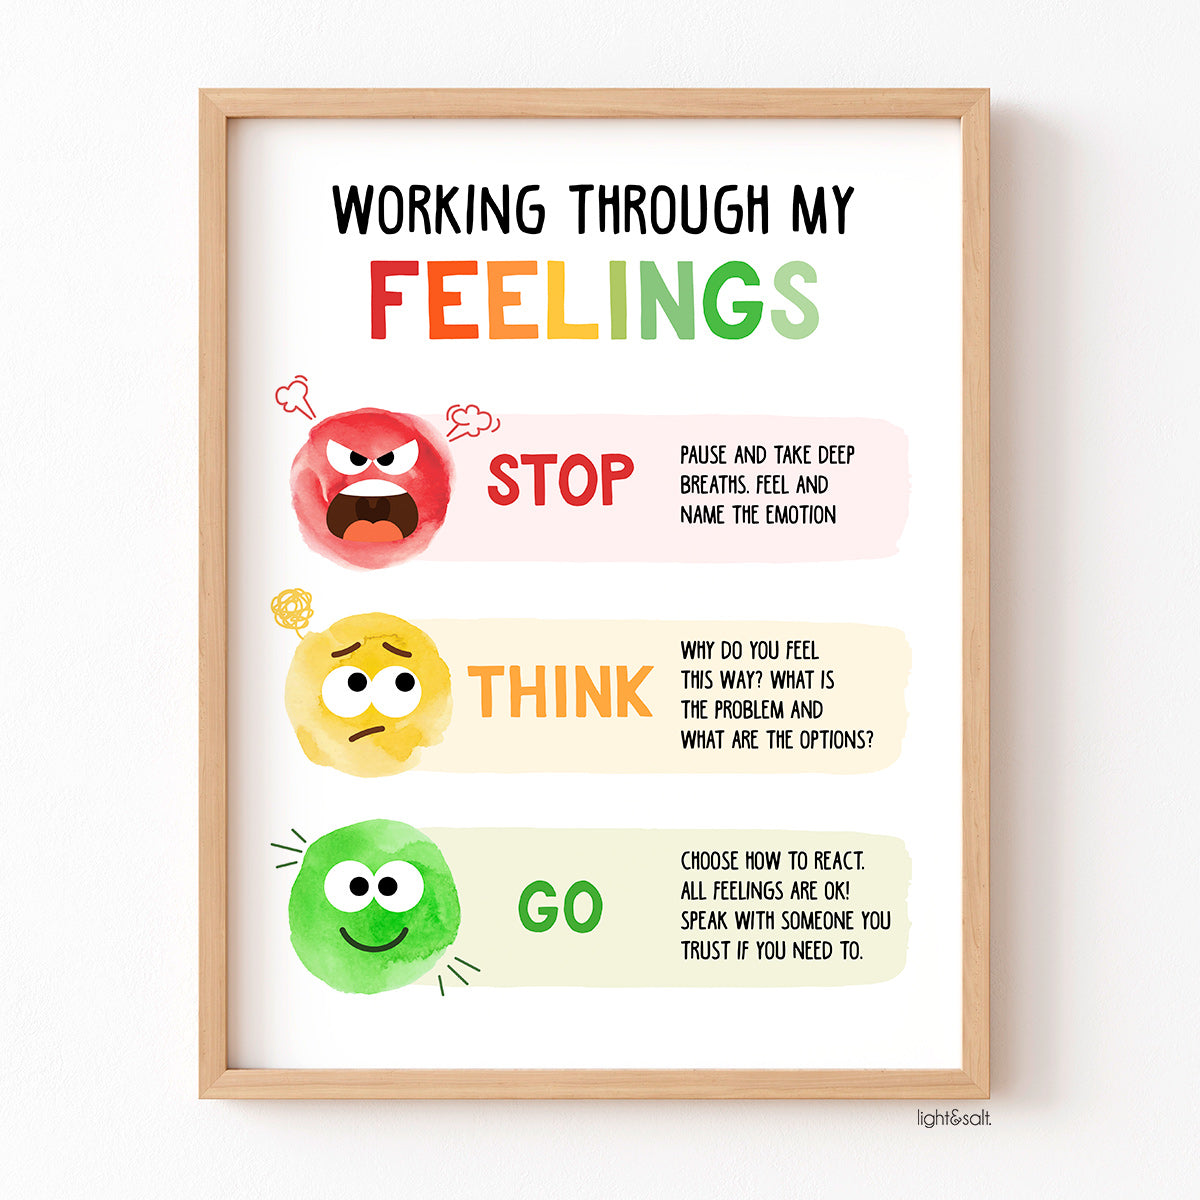 Working through my feelings, feelings thermometer poster